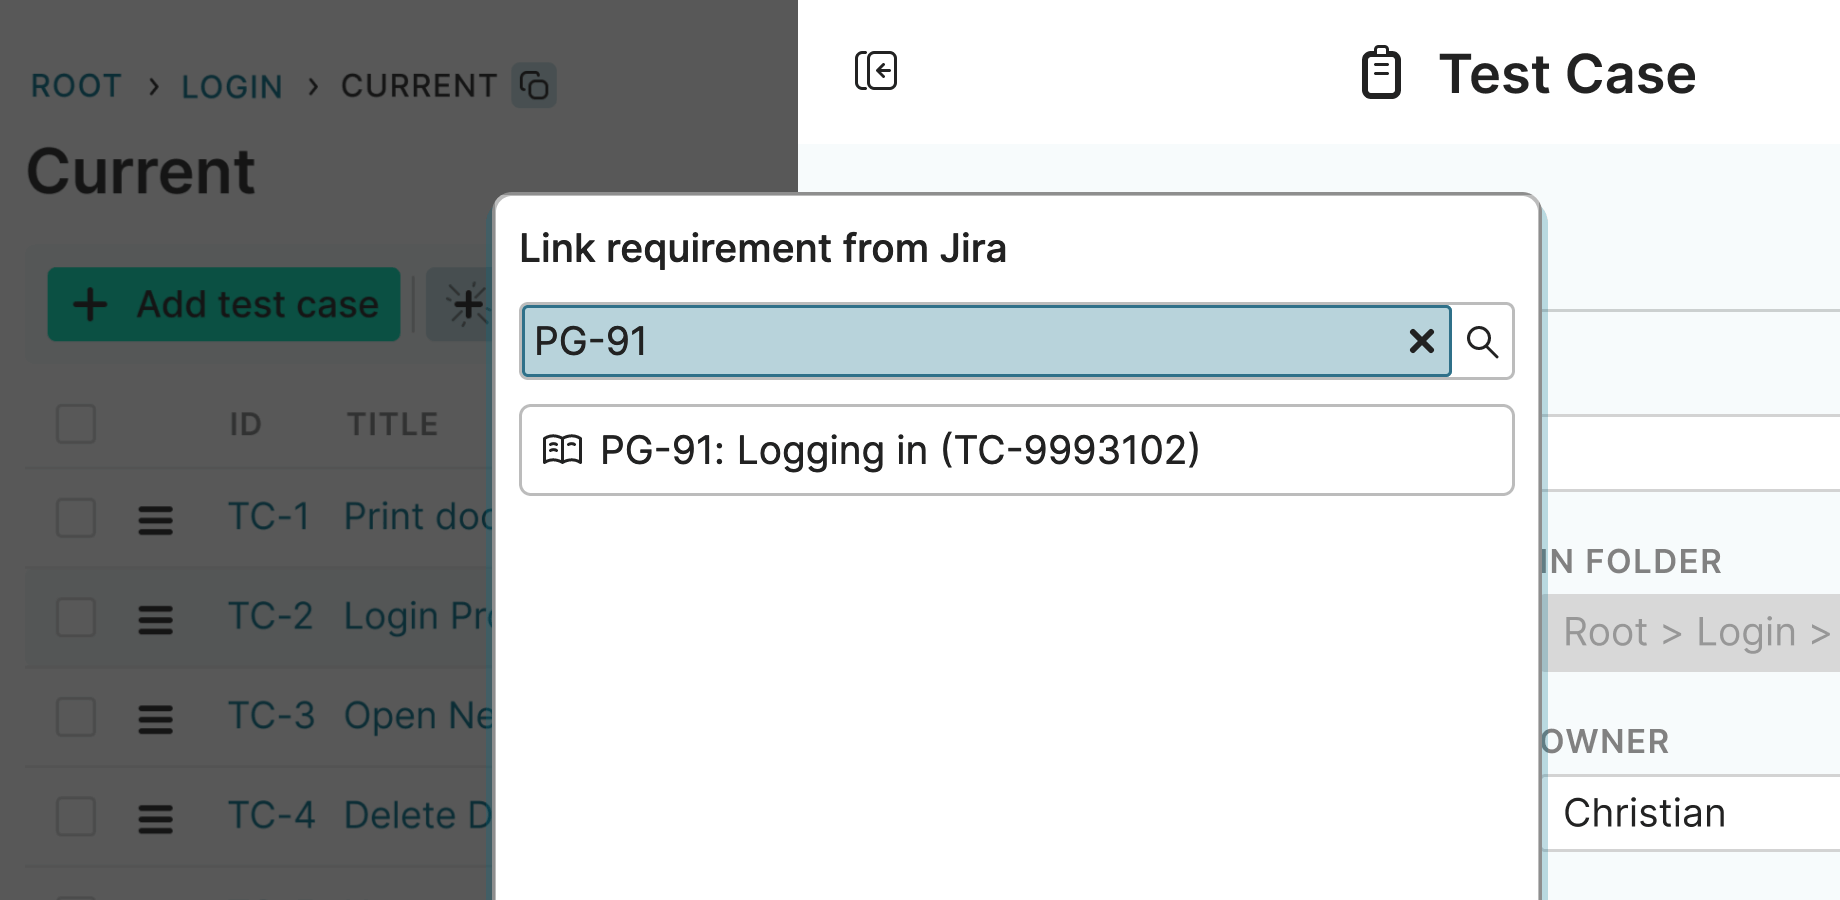 Testiny: Link requirements from Jira